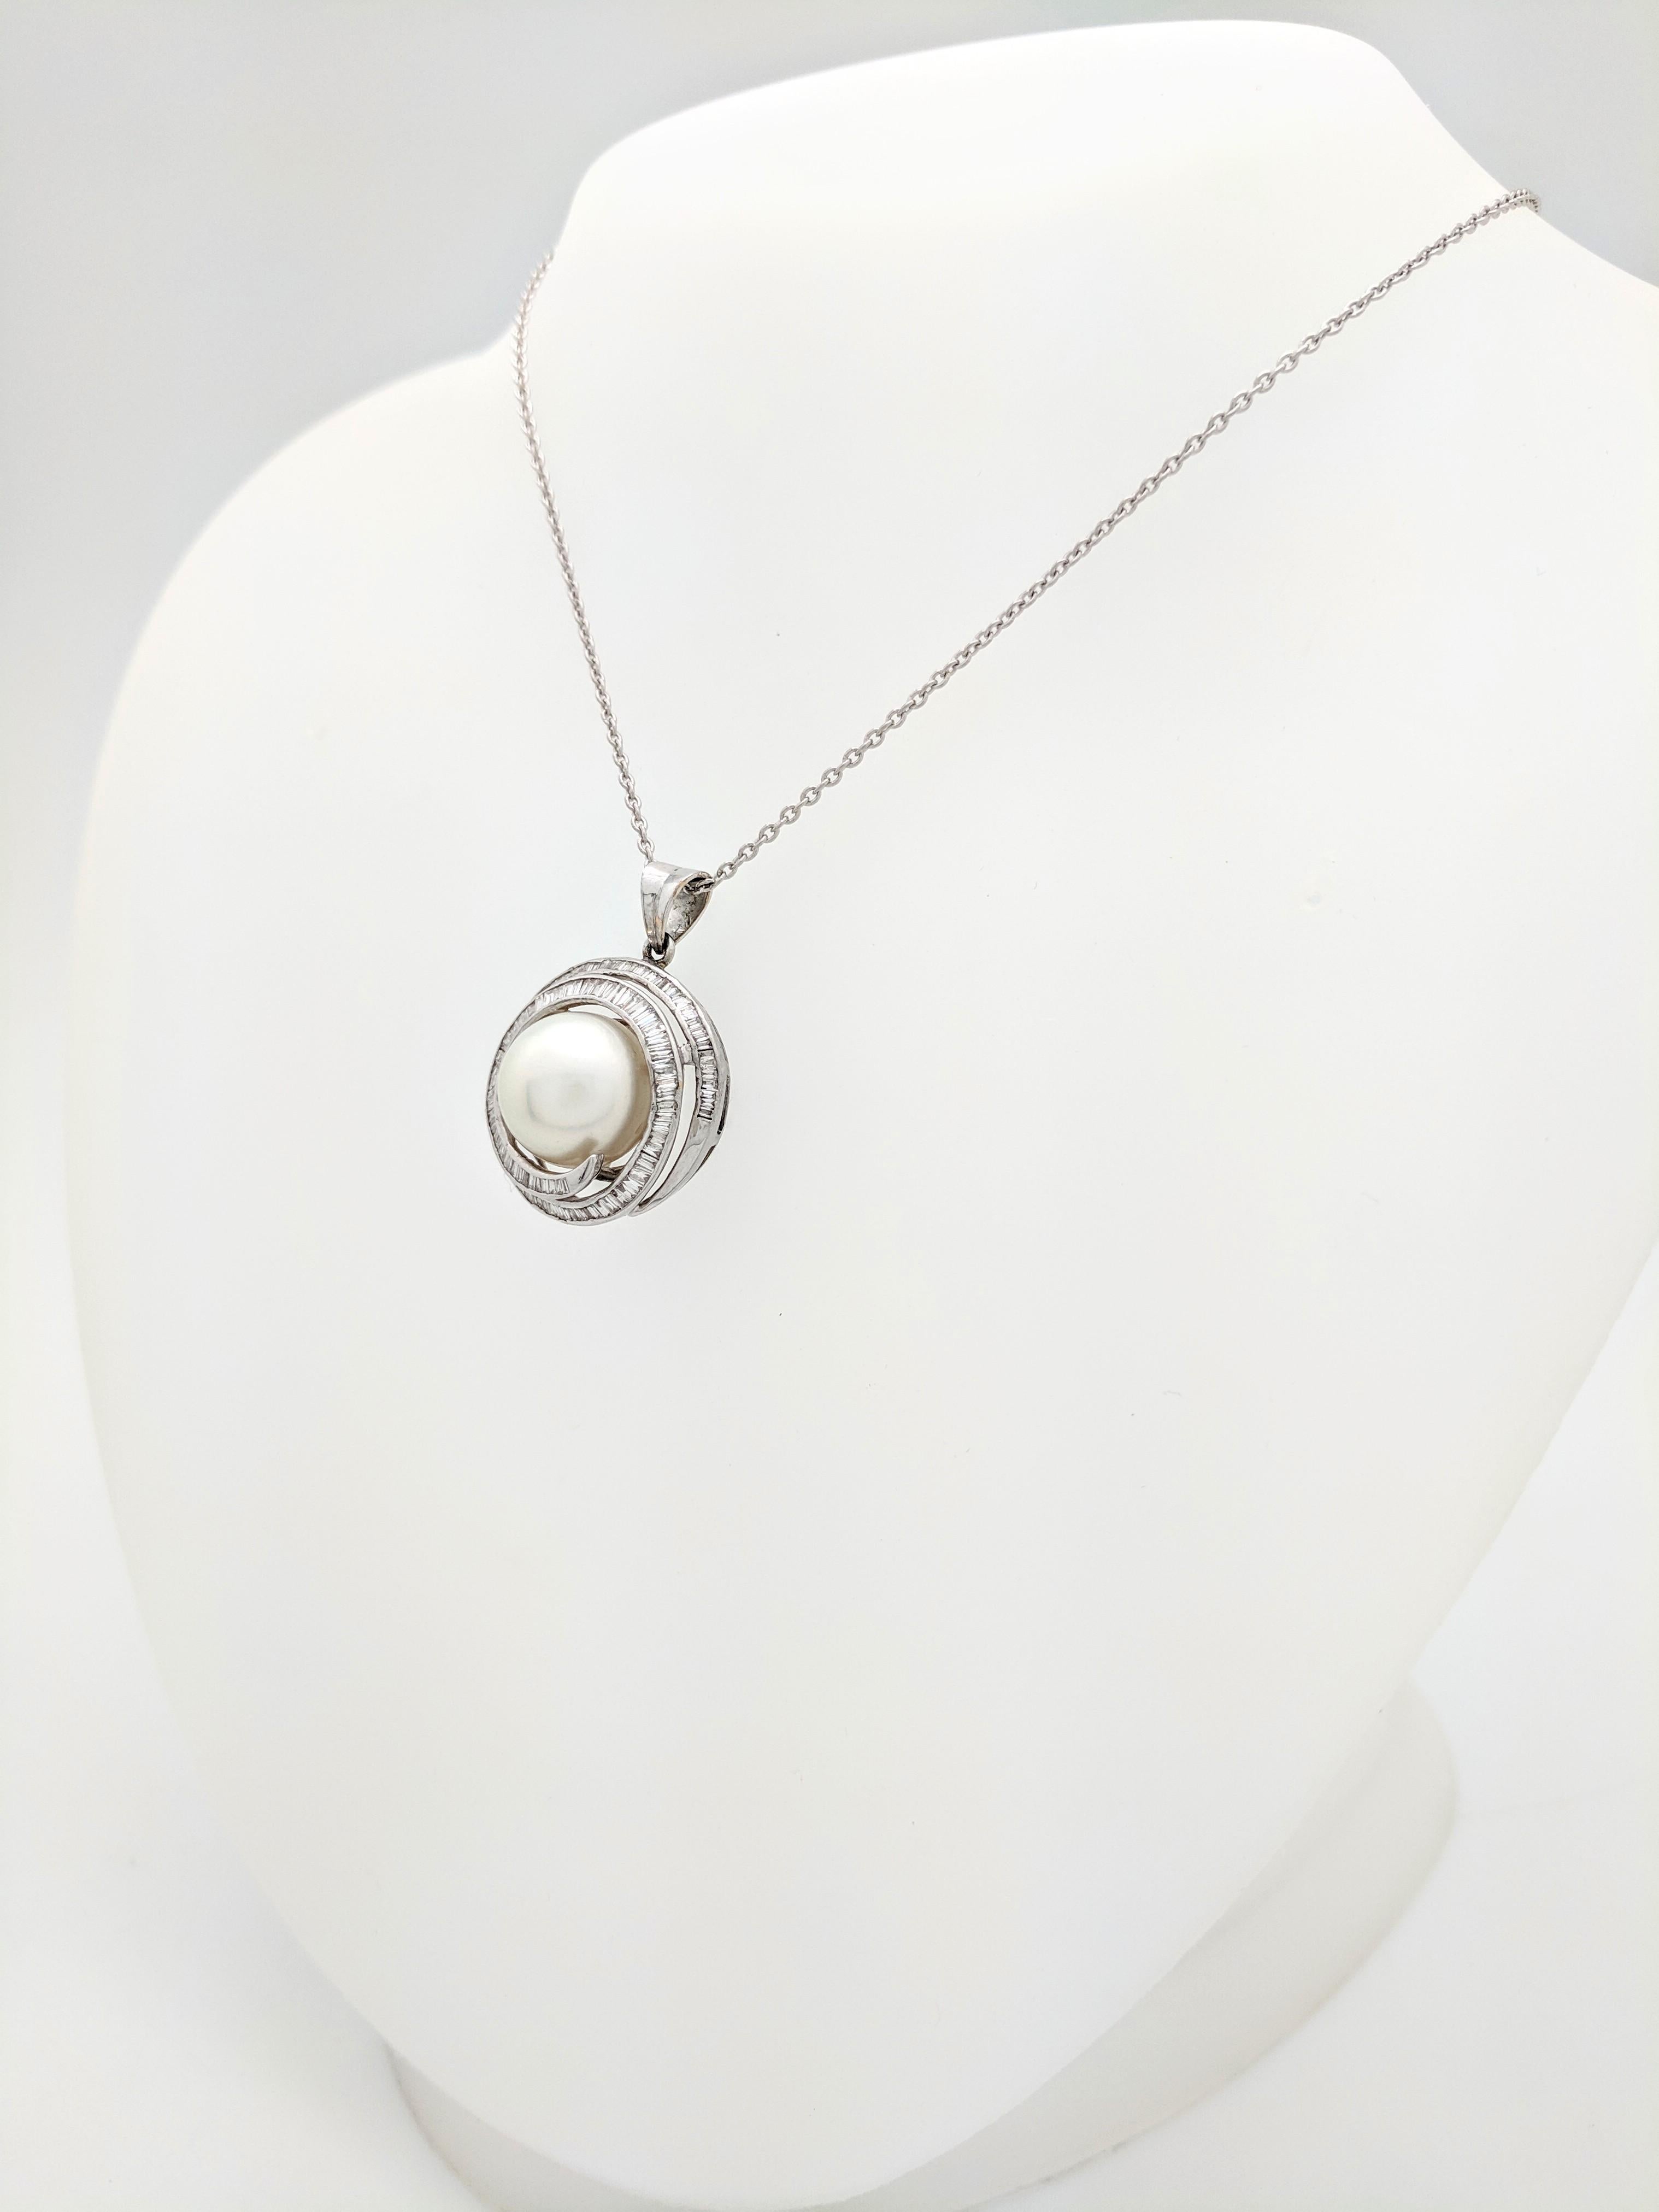 14 Karat White Gold Mabe Pearl and Baguette Cut Diamond Swirl Pendant Necklace In Good Condition For Sale In Gainesville, FL